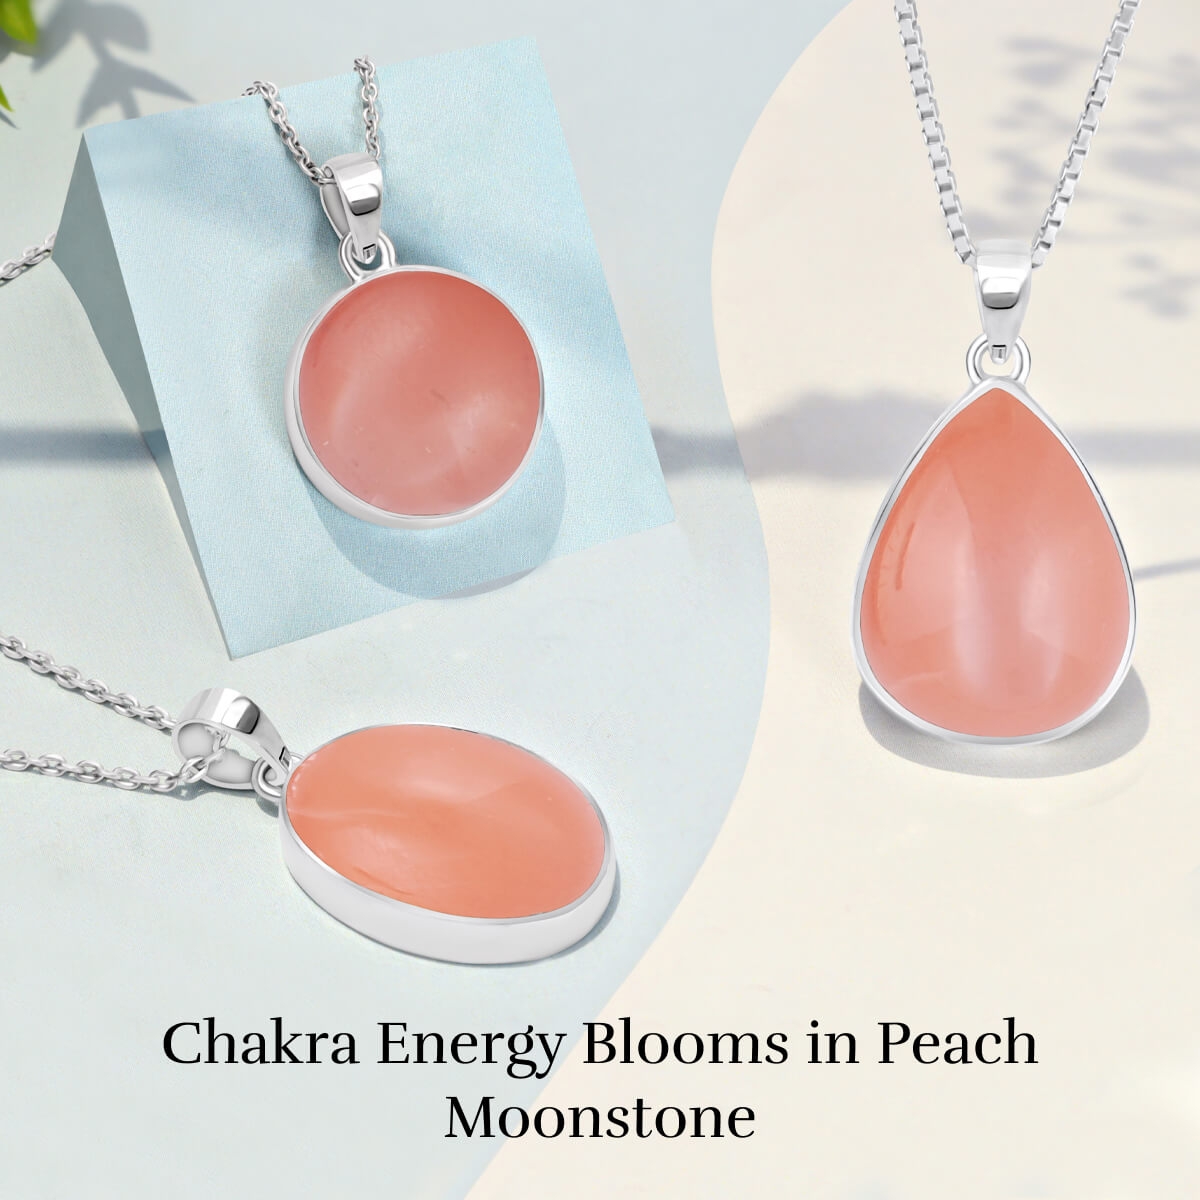 Correlation of Peach Moonstone With the Chakras